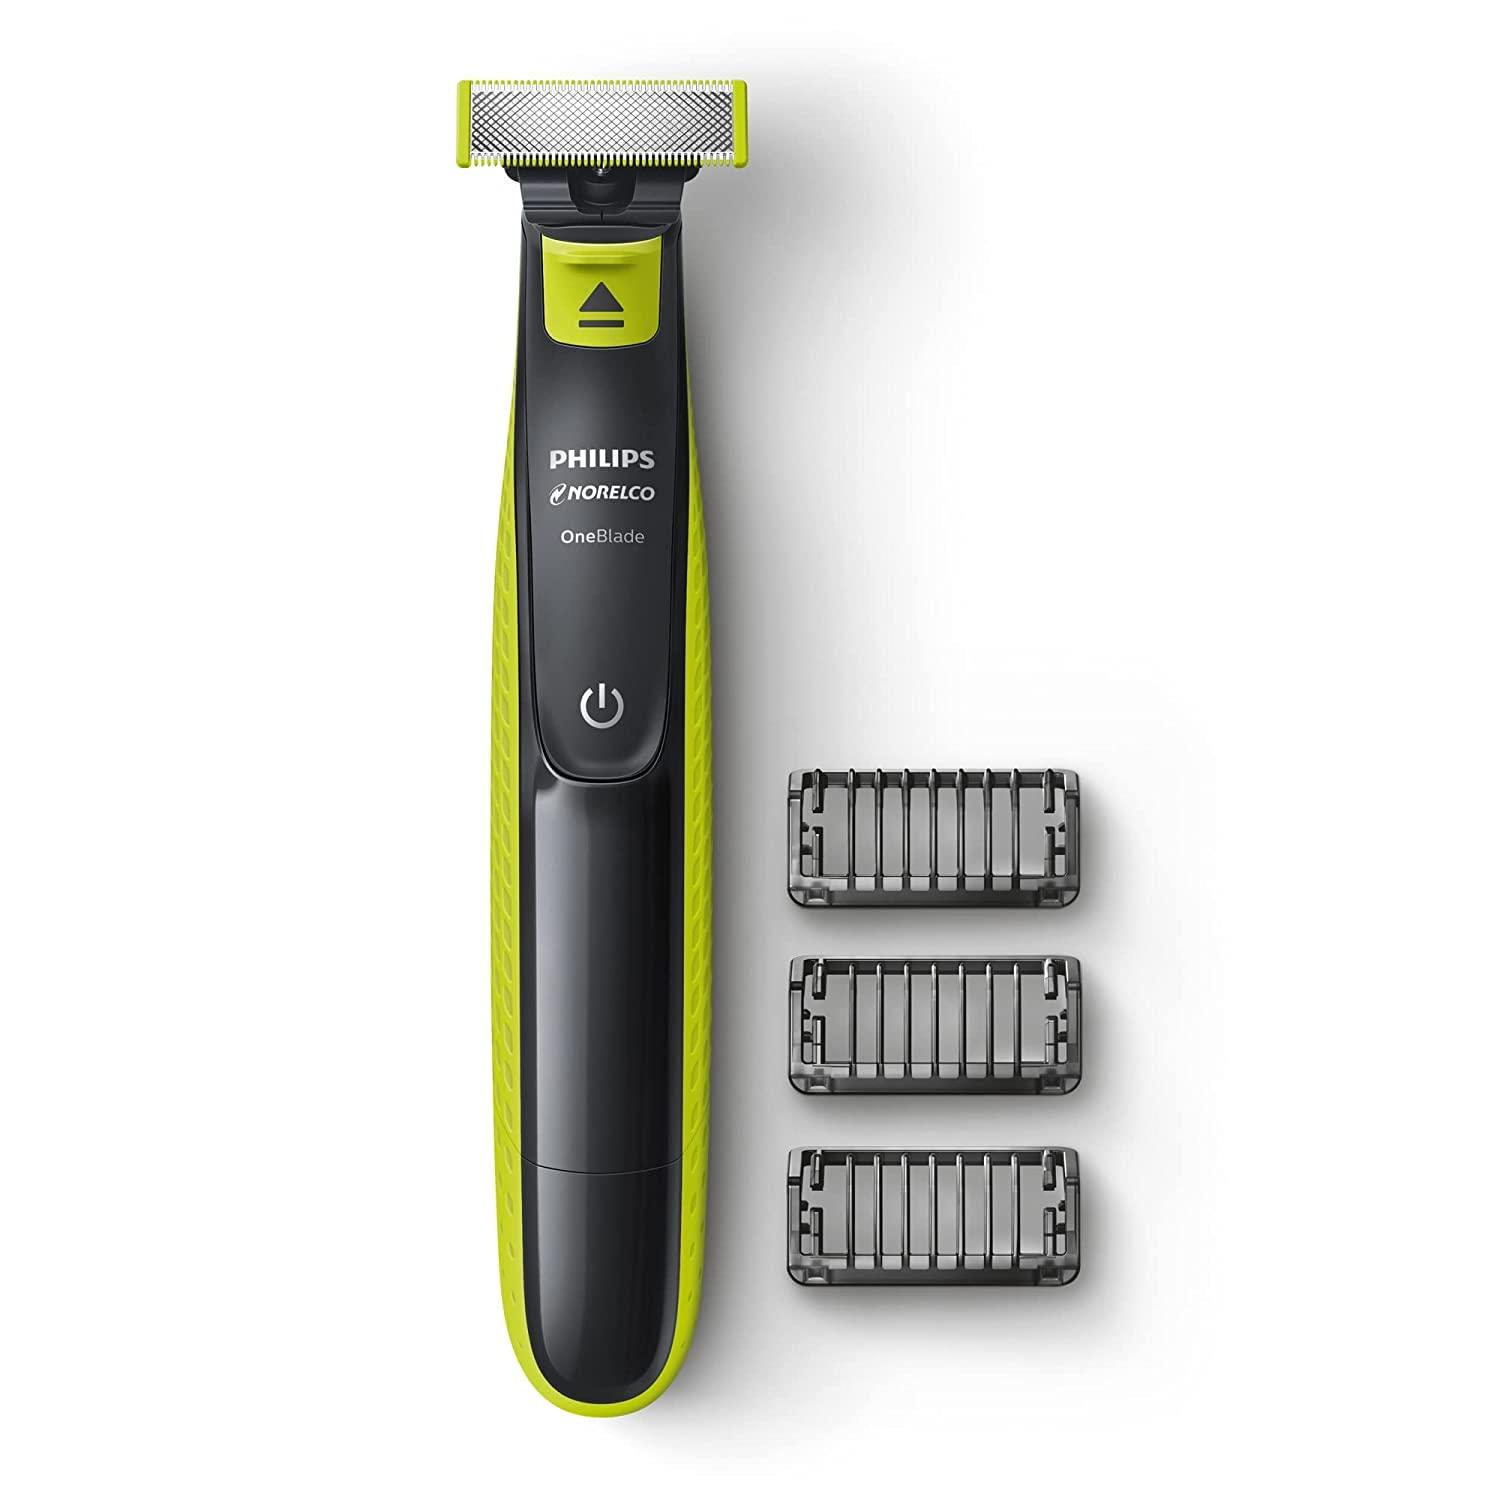 Philips Norelco OneBlade Hybrid Electric Trimmer and Shaver for $23.99 Shipped